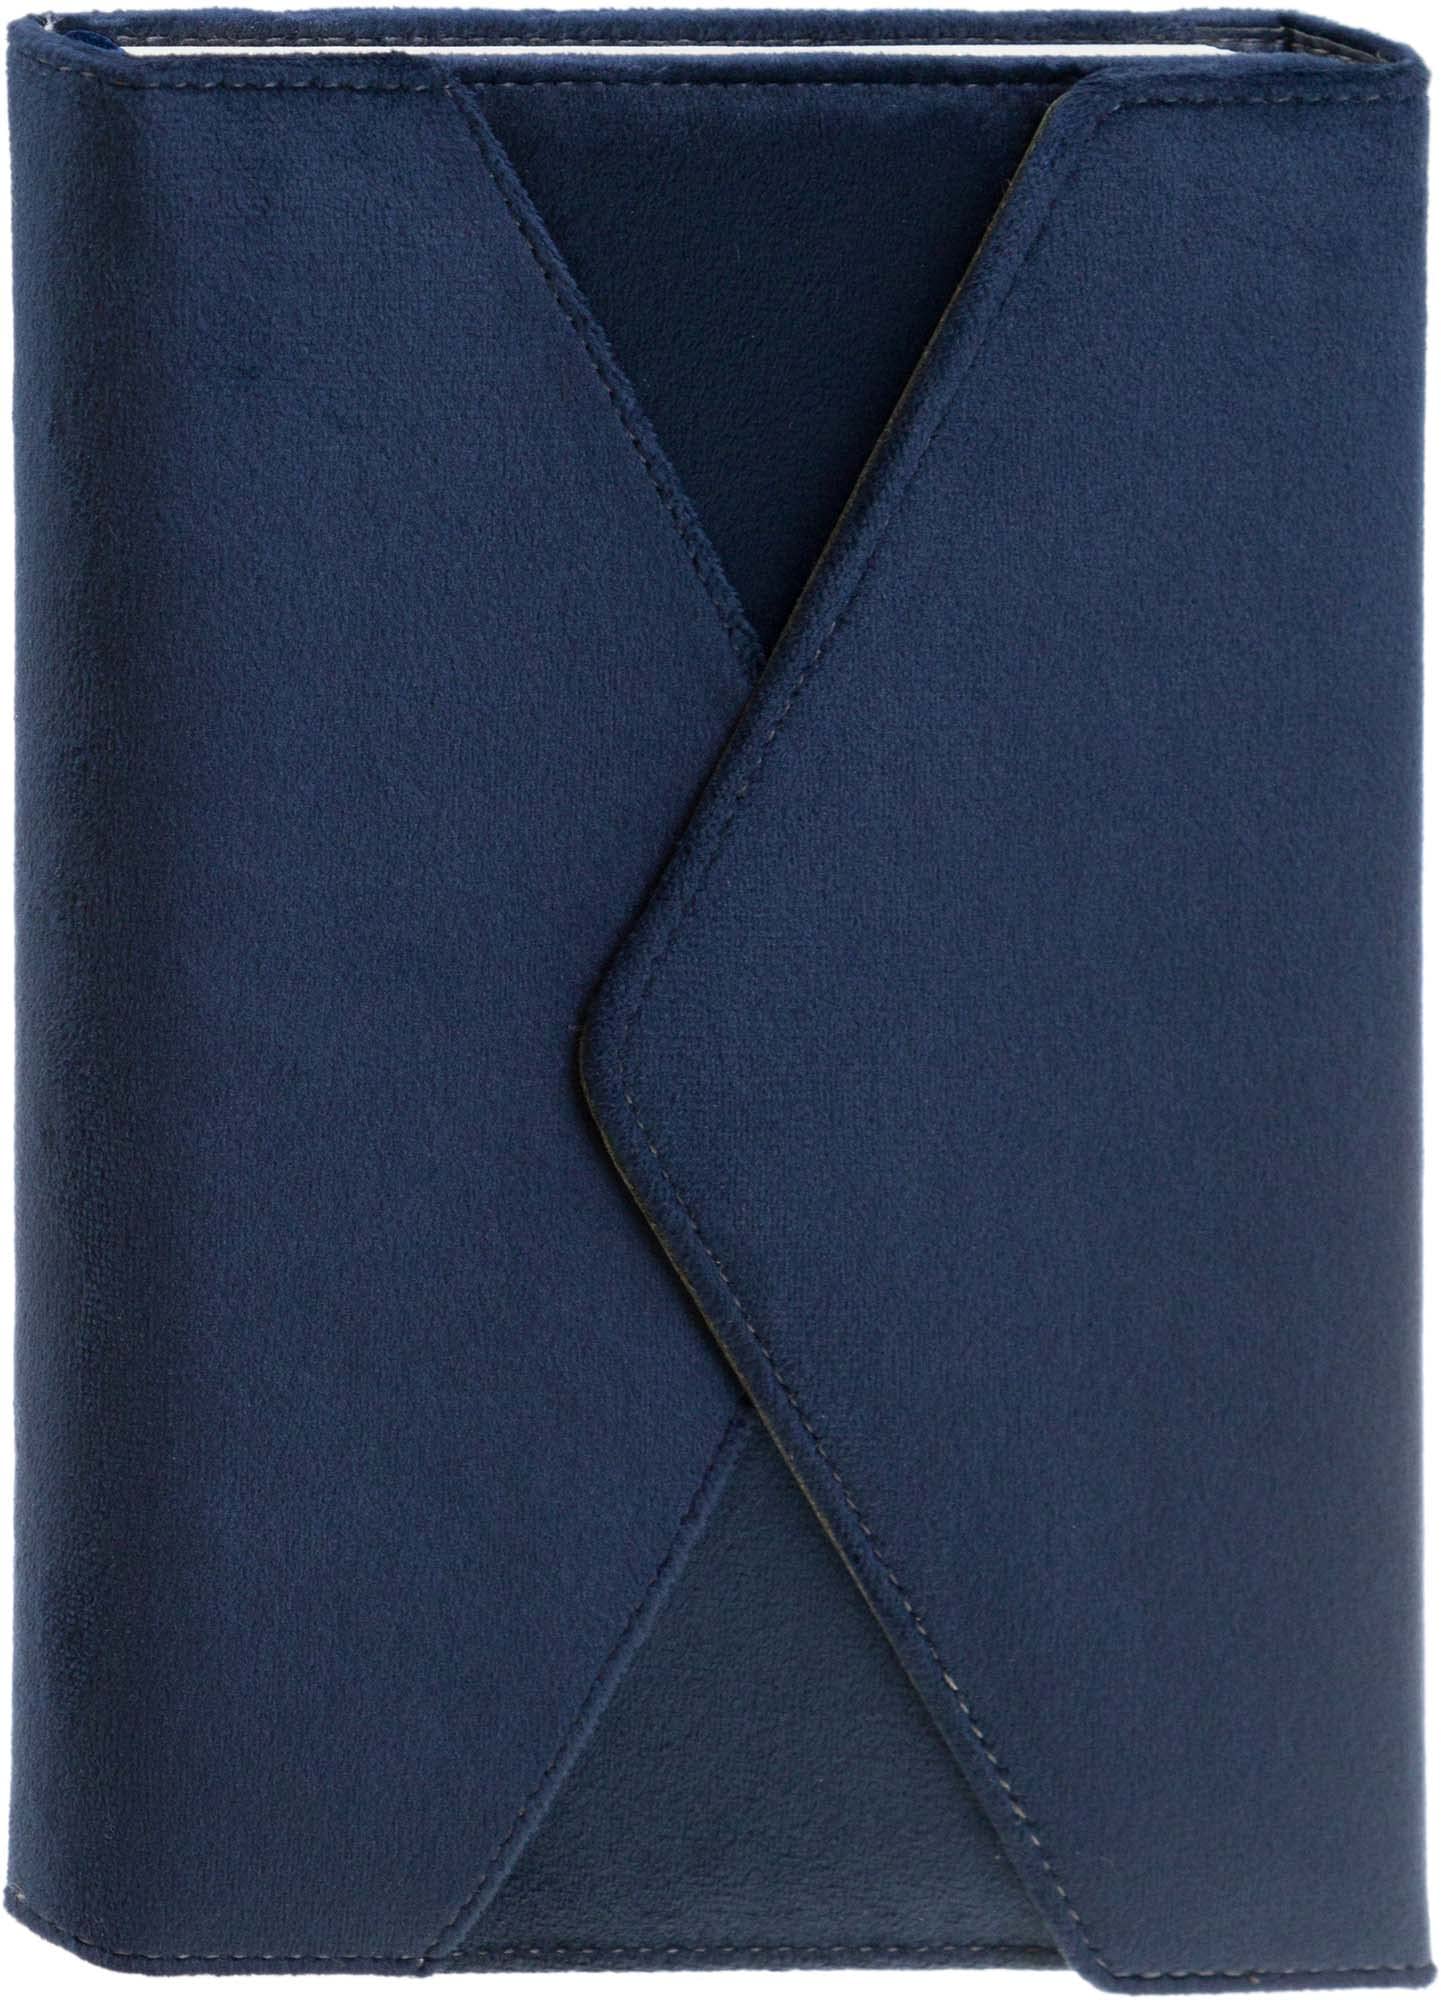 Eccolo Lined Journal Notebook Navy Blue